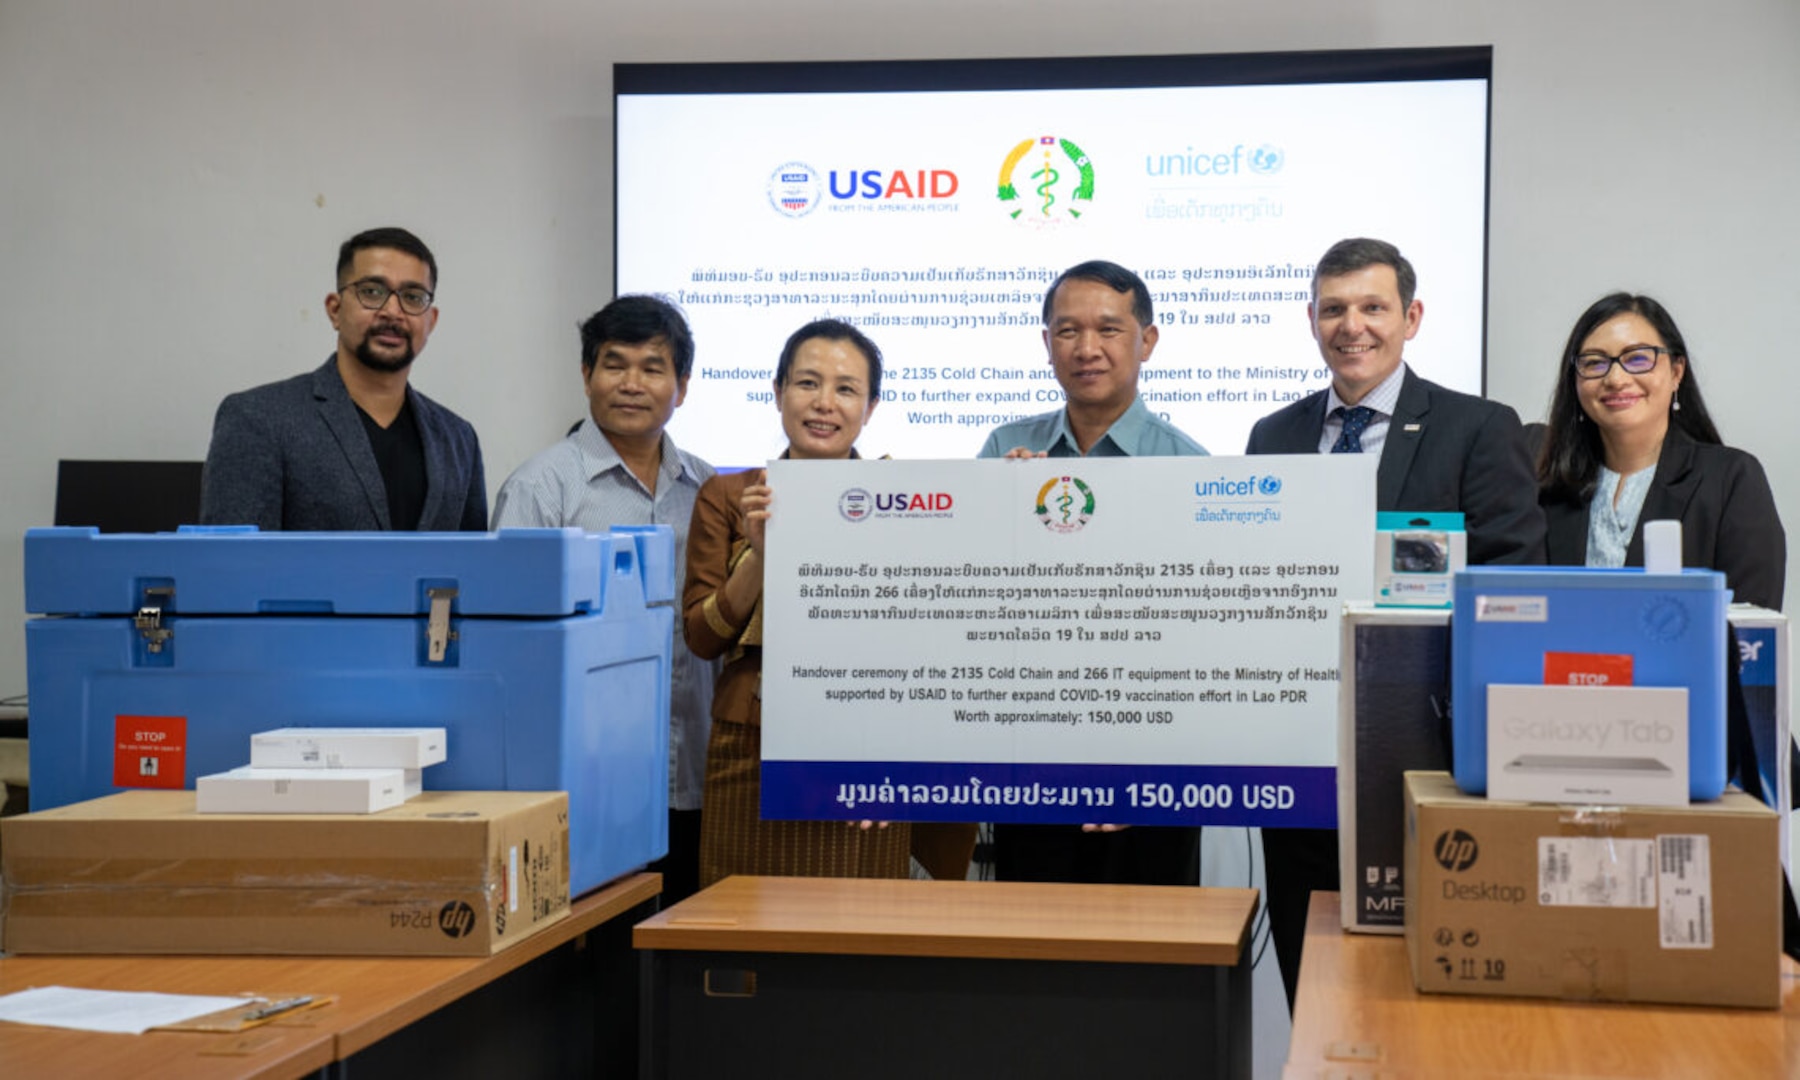 USAID Supports the Ministry of Health to Expand COVID-19 Vaccination in Lao PDR